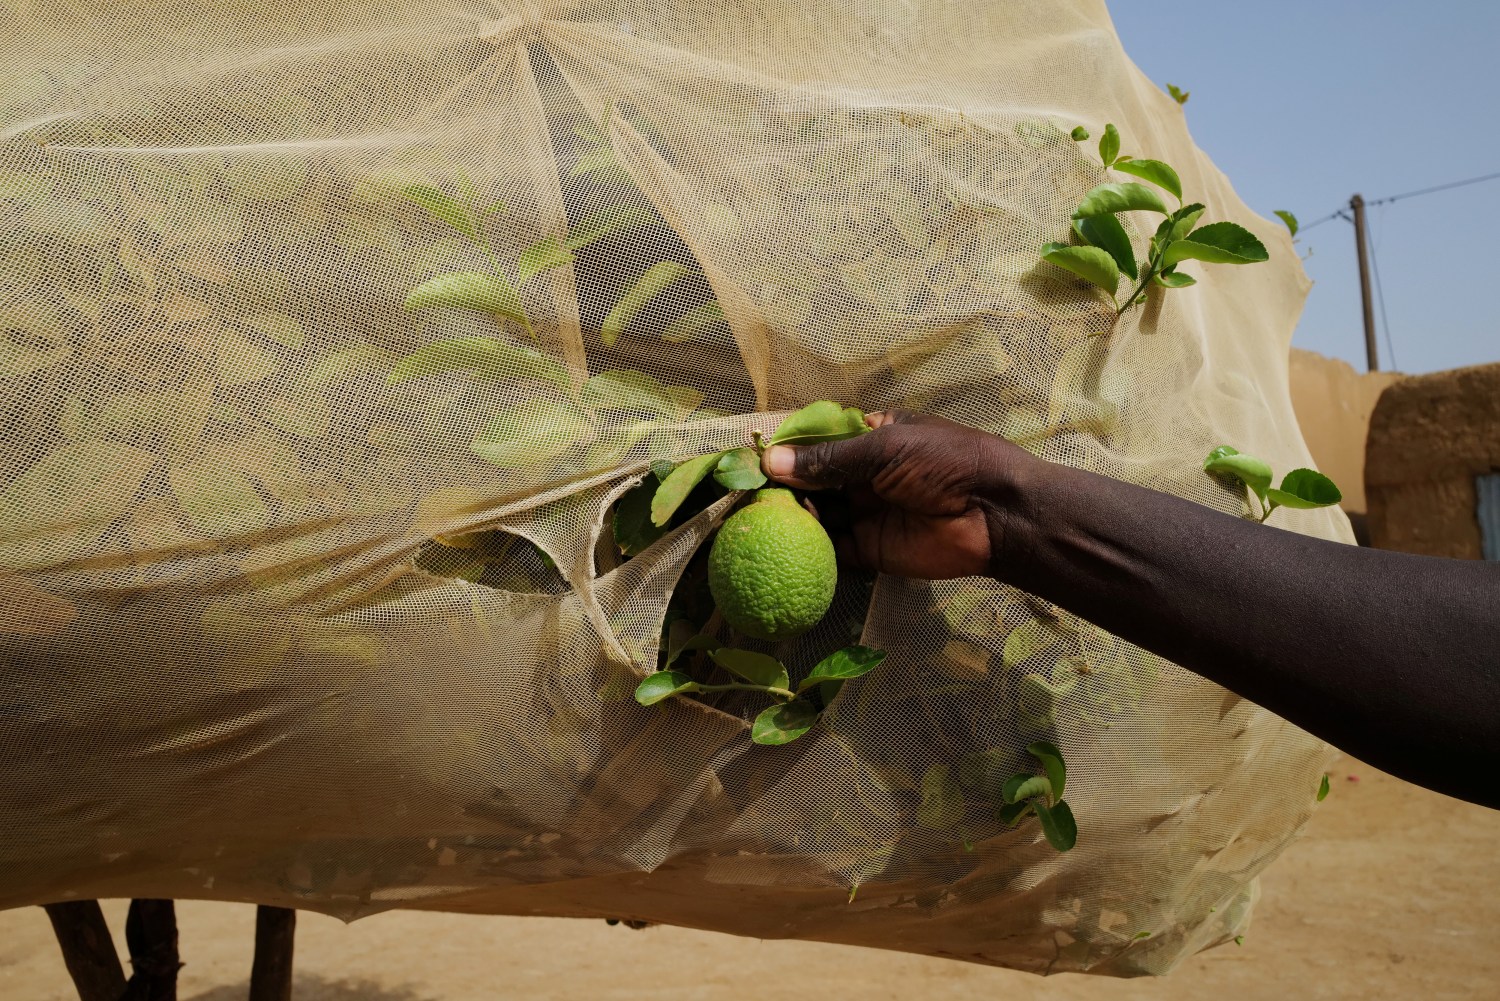 Simbe Gue Soro Ndiouk, 60, stands beside his lemon tree, that he covers to protect it from wind, dust and animals in an area that is part of the Great Green Wall of the Sahara and the Sahel, in Walalde department of Podor, Senegal, July 11, 2021. REUTERS/Zohra Bensemra     SEARCH "BENSEMRA REFORESTATION" FOR THIS STORY. SEARCH "WIDER IMAGE" FOR ALL STORIES     TPX IMAGES OF THE DAY